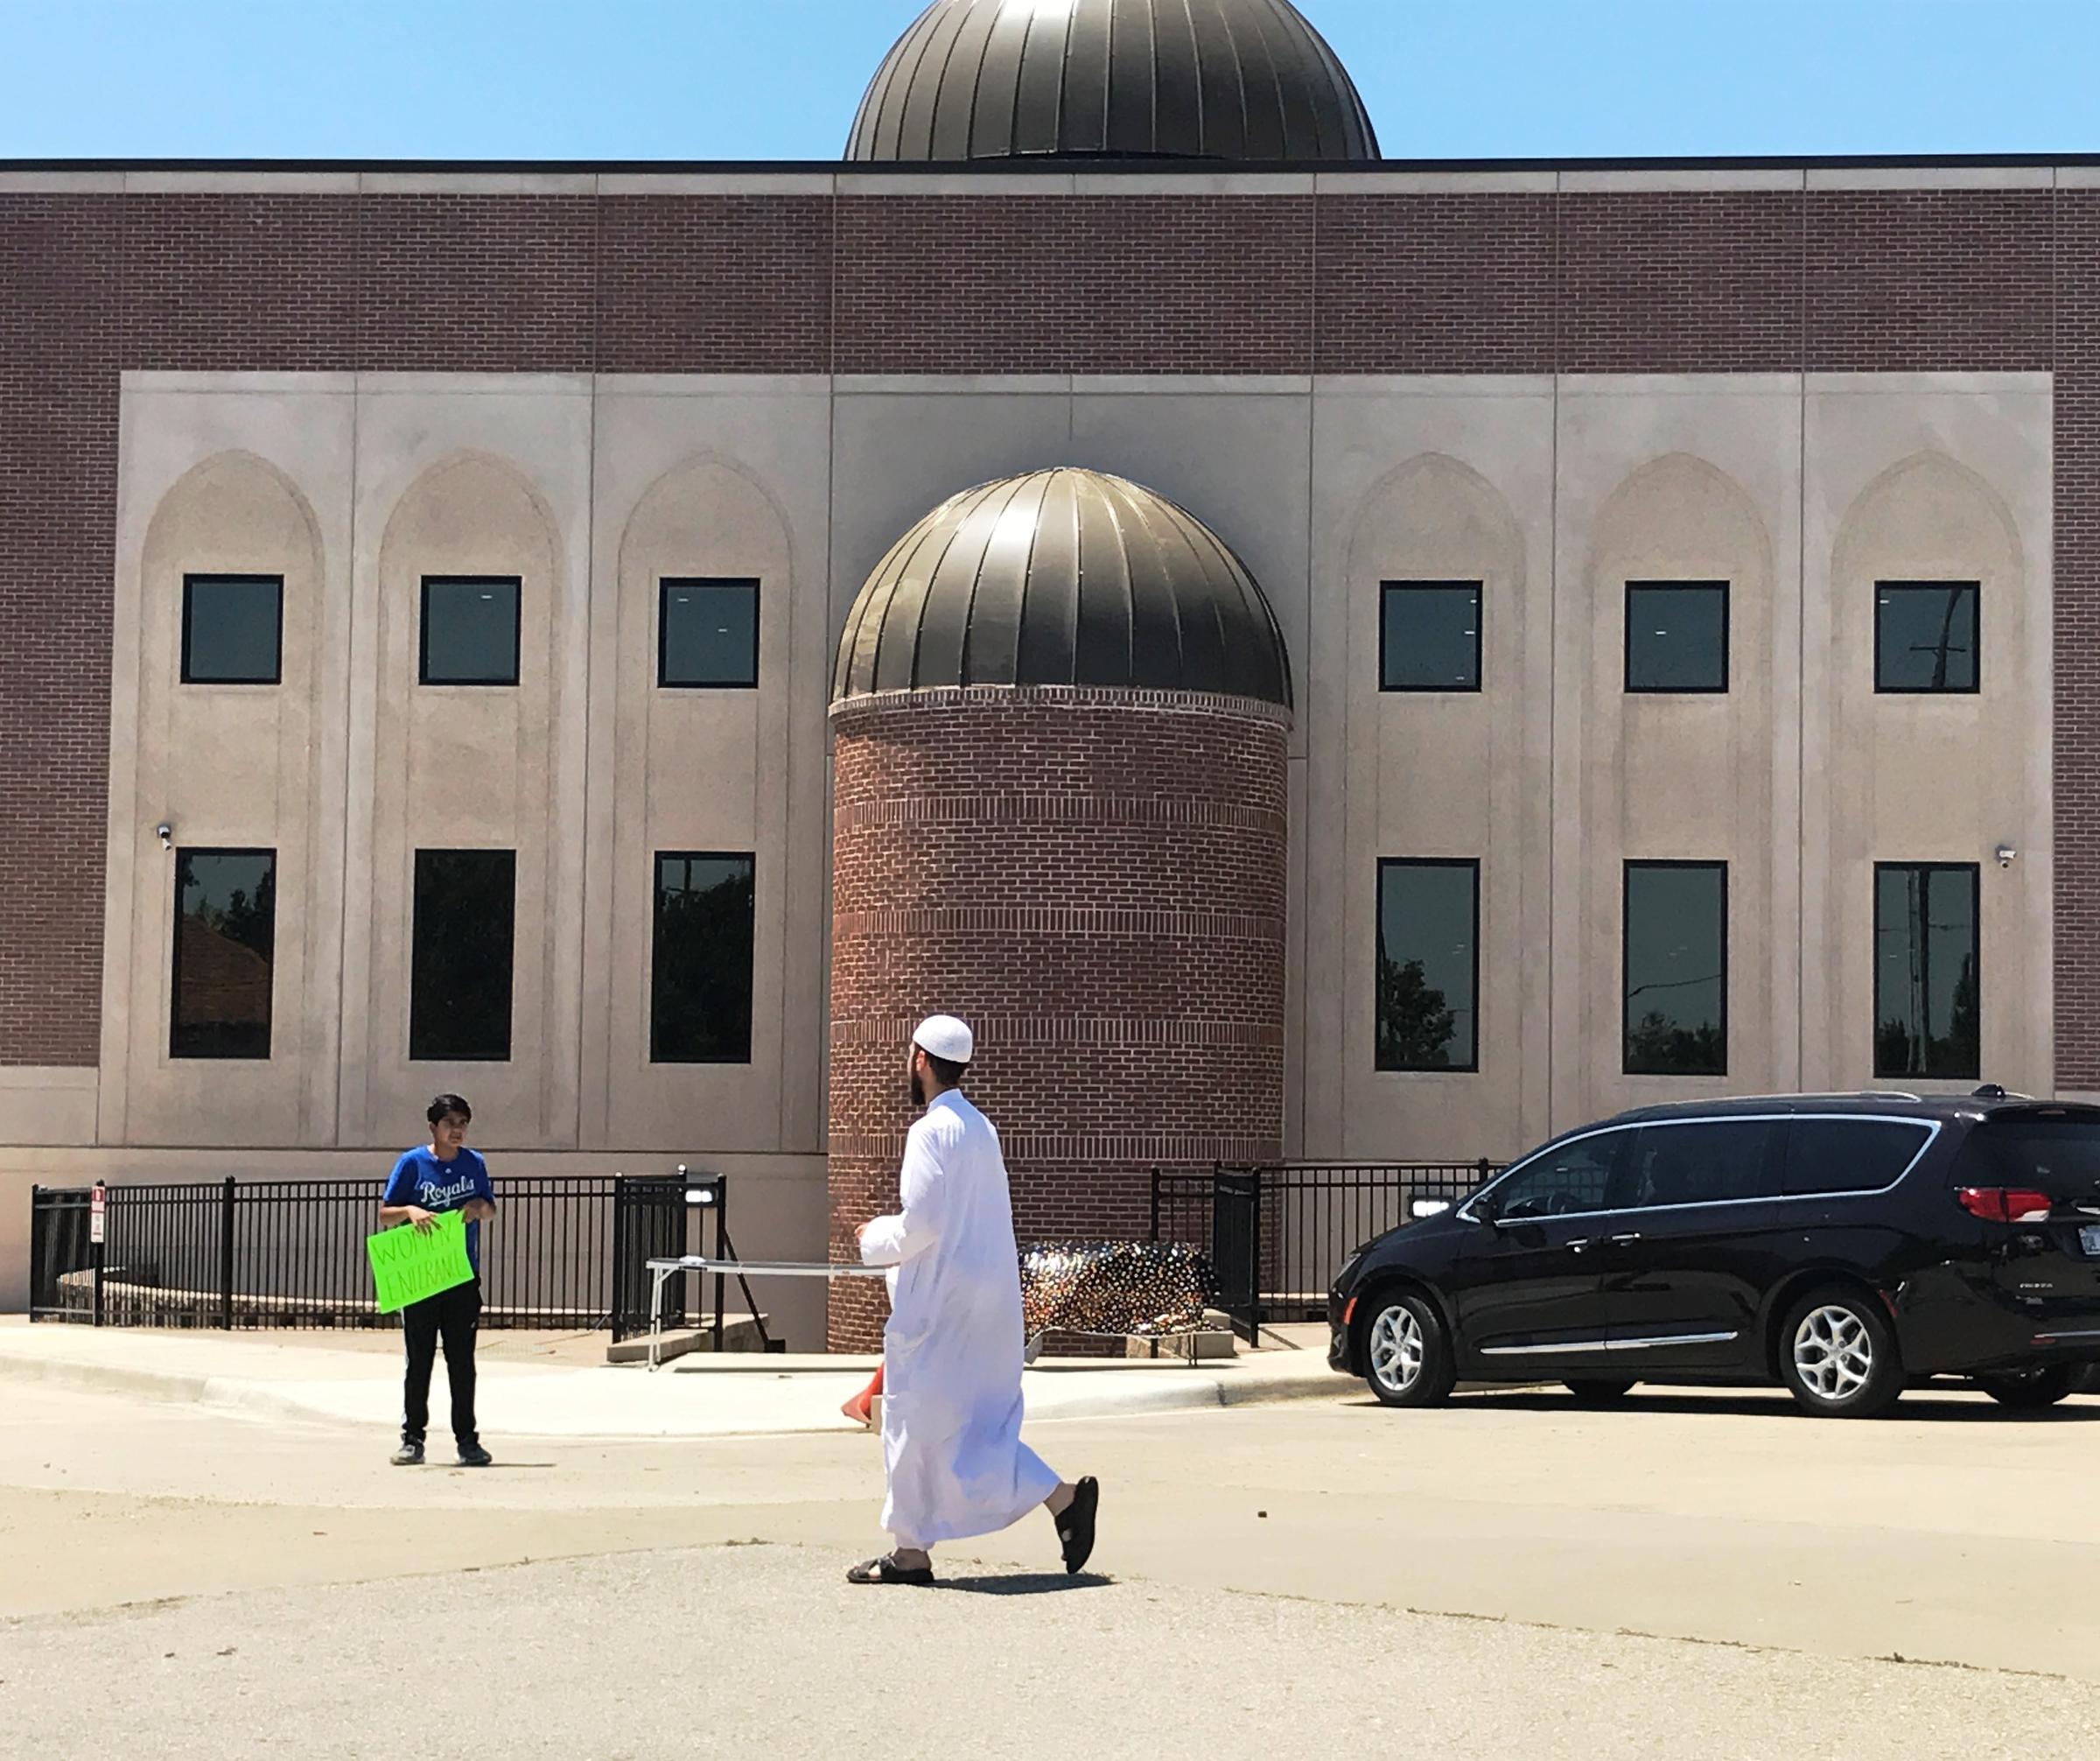 Cross Section Of Community Celebrates New Mosque In Overland Park